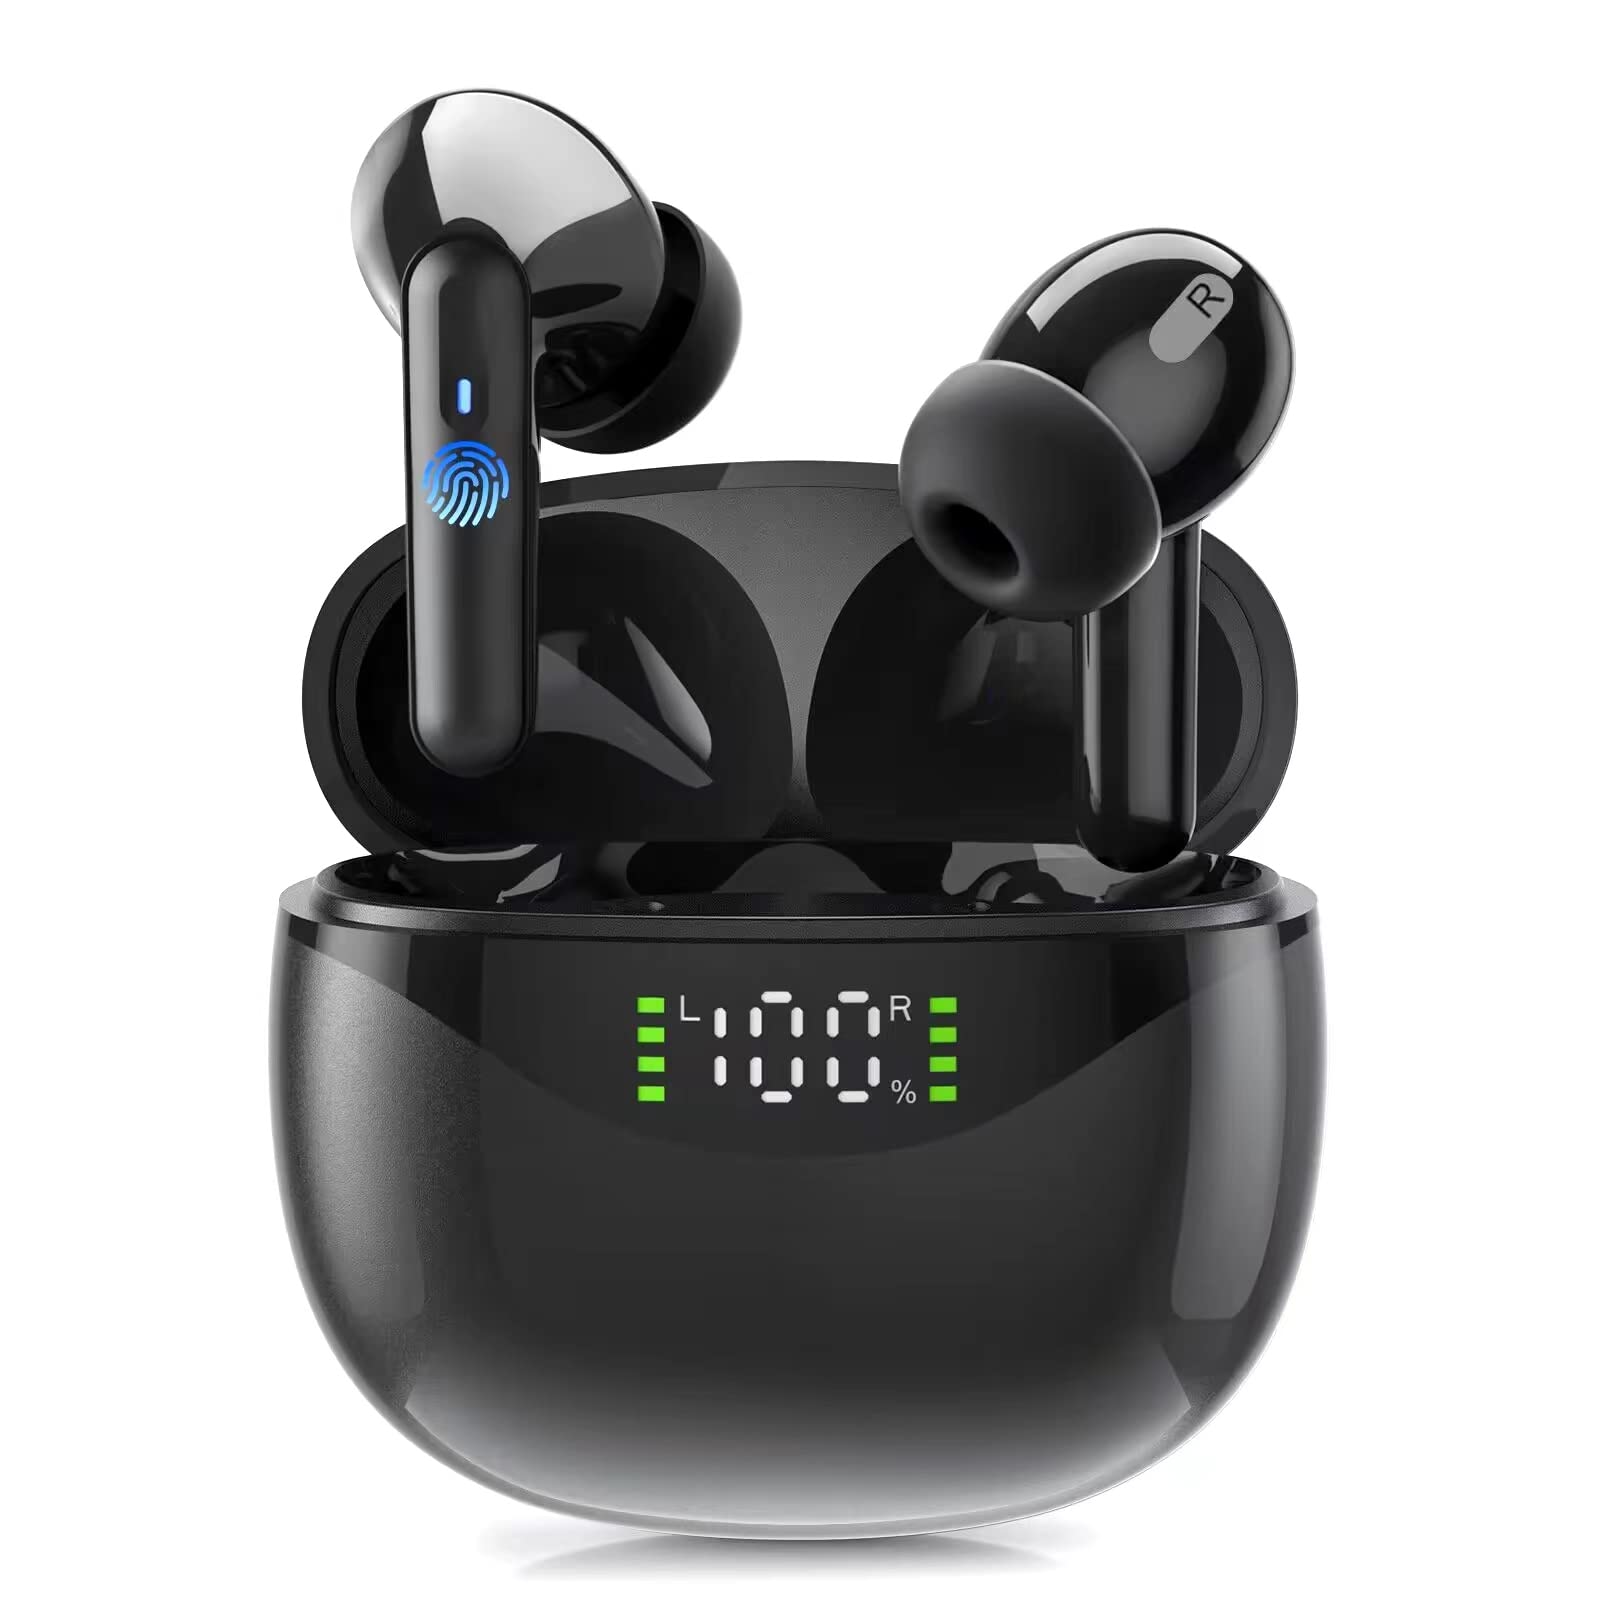 Compatible Wireless Earbuds For Your IPhone